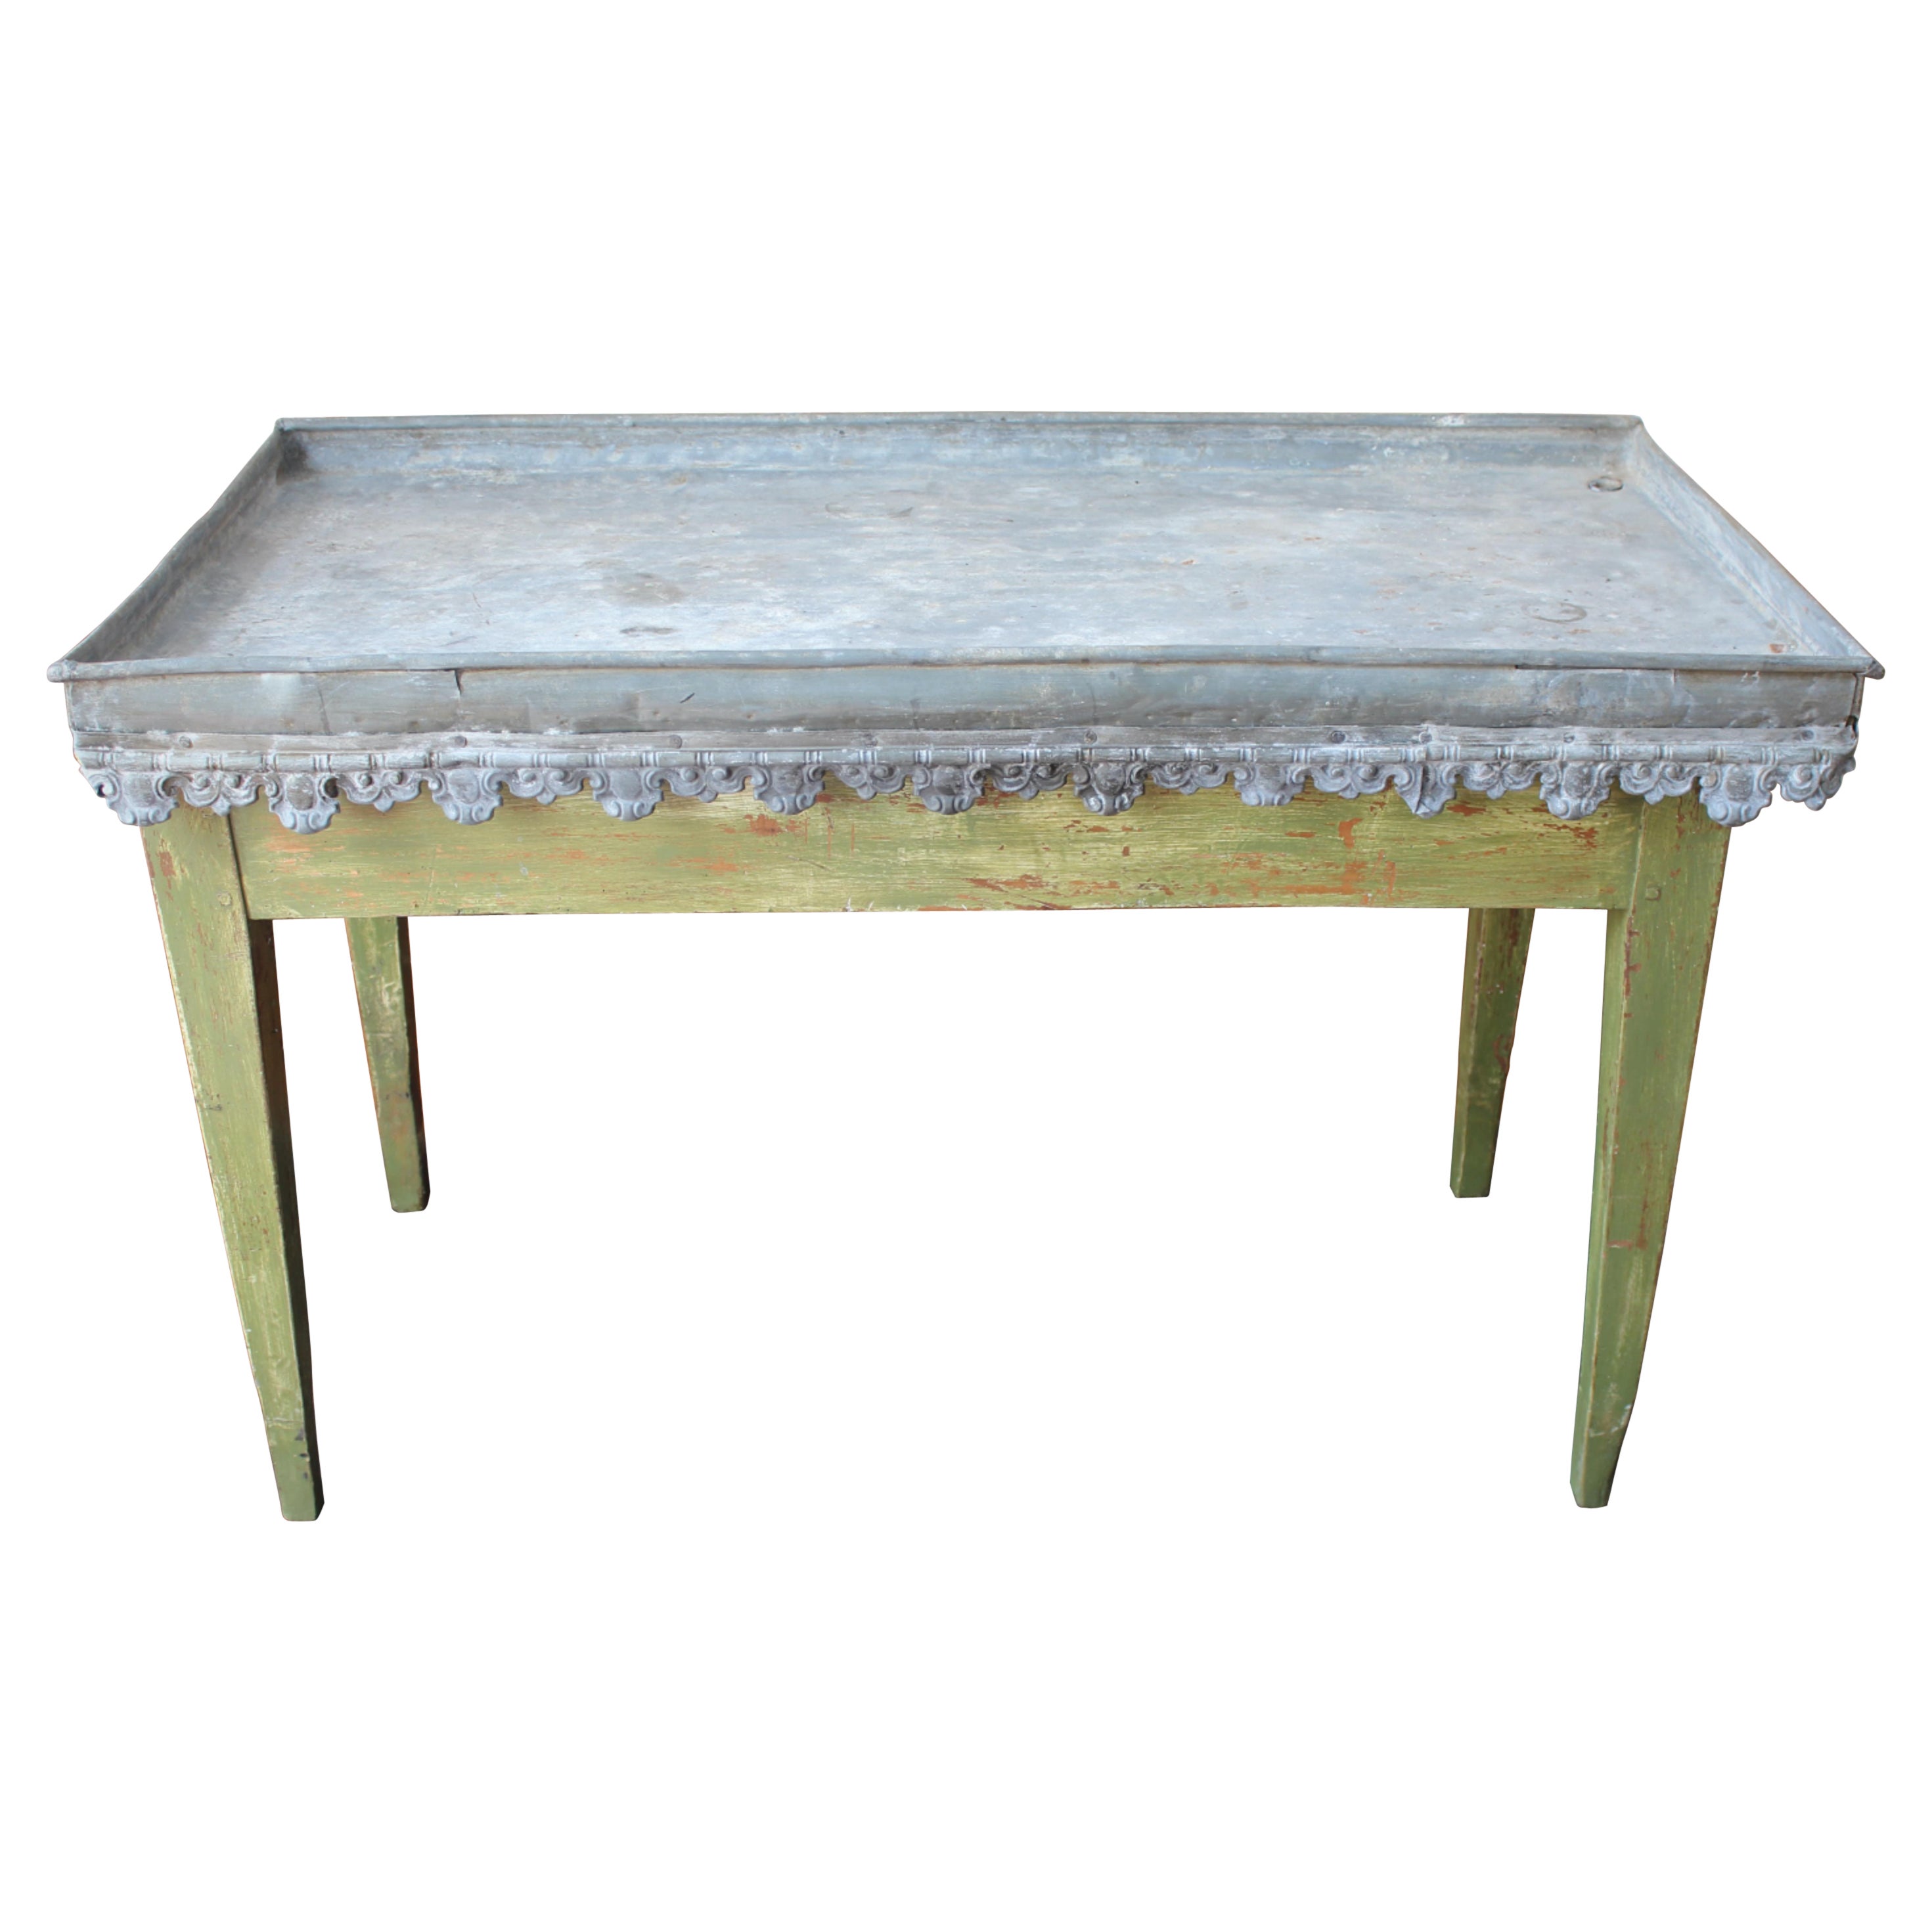 Early 20th Century English Country House Zinc Orangery Potting Garden Table 